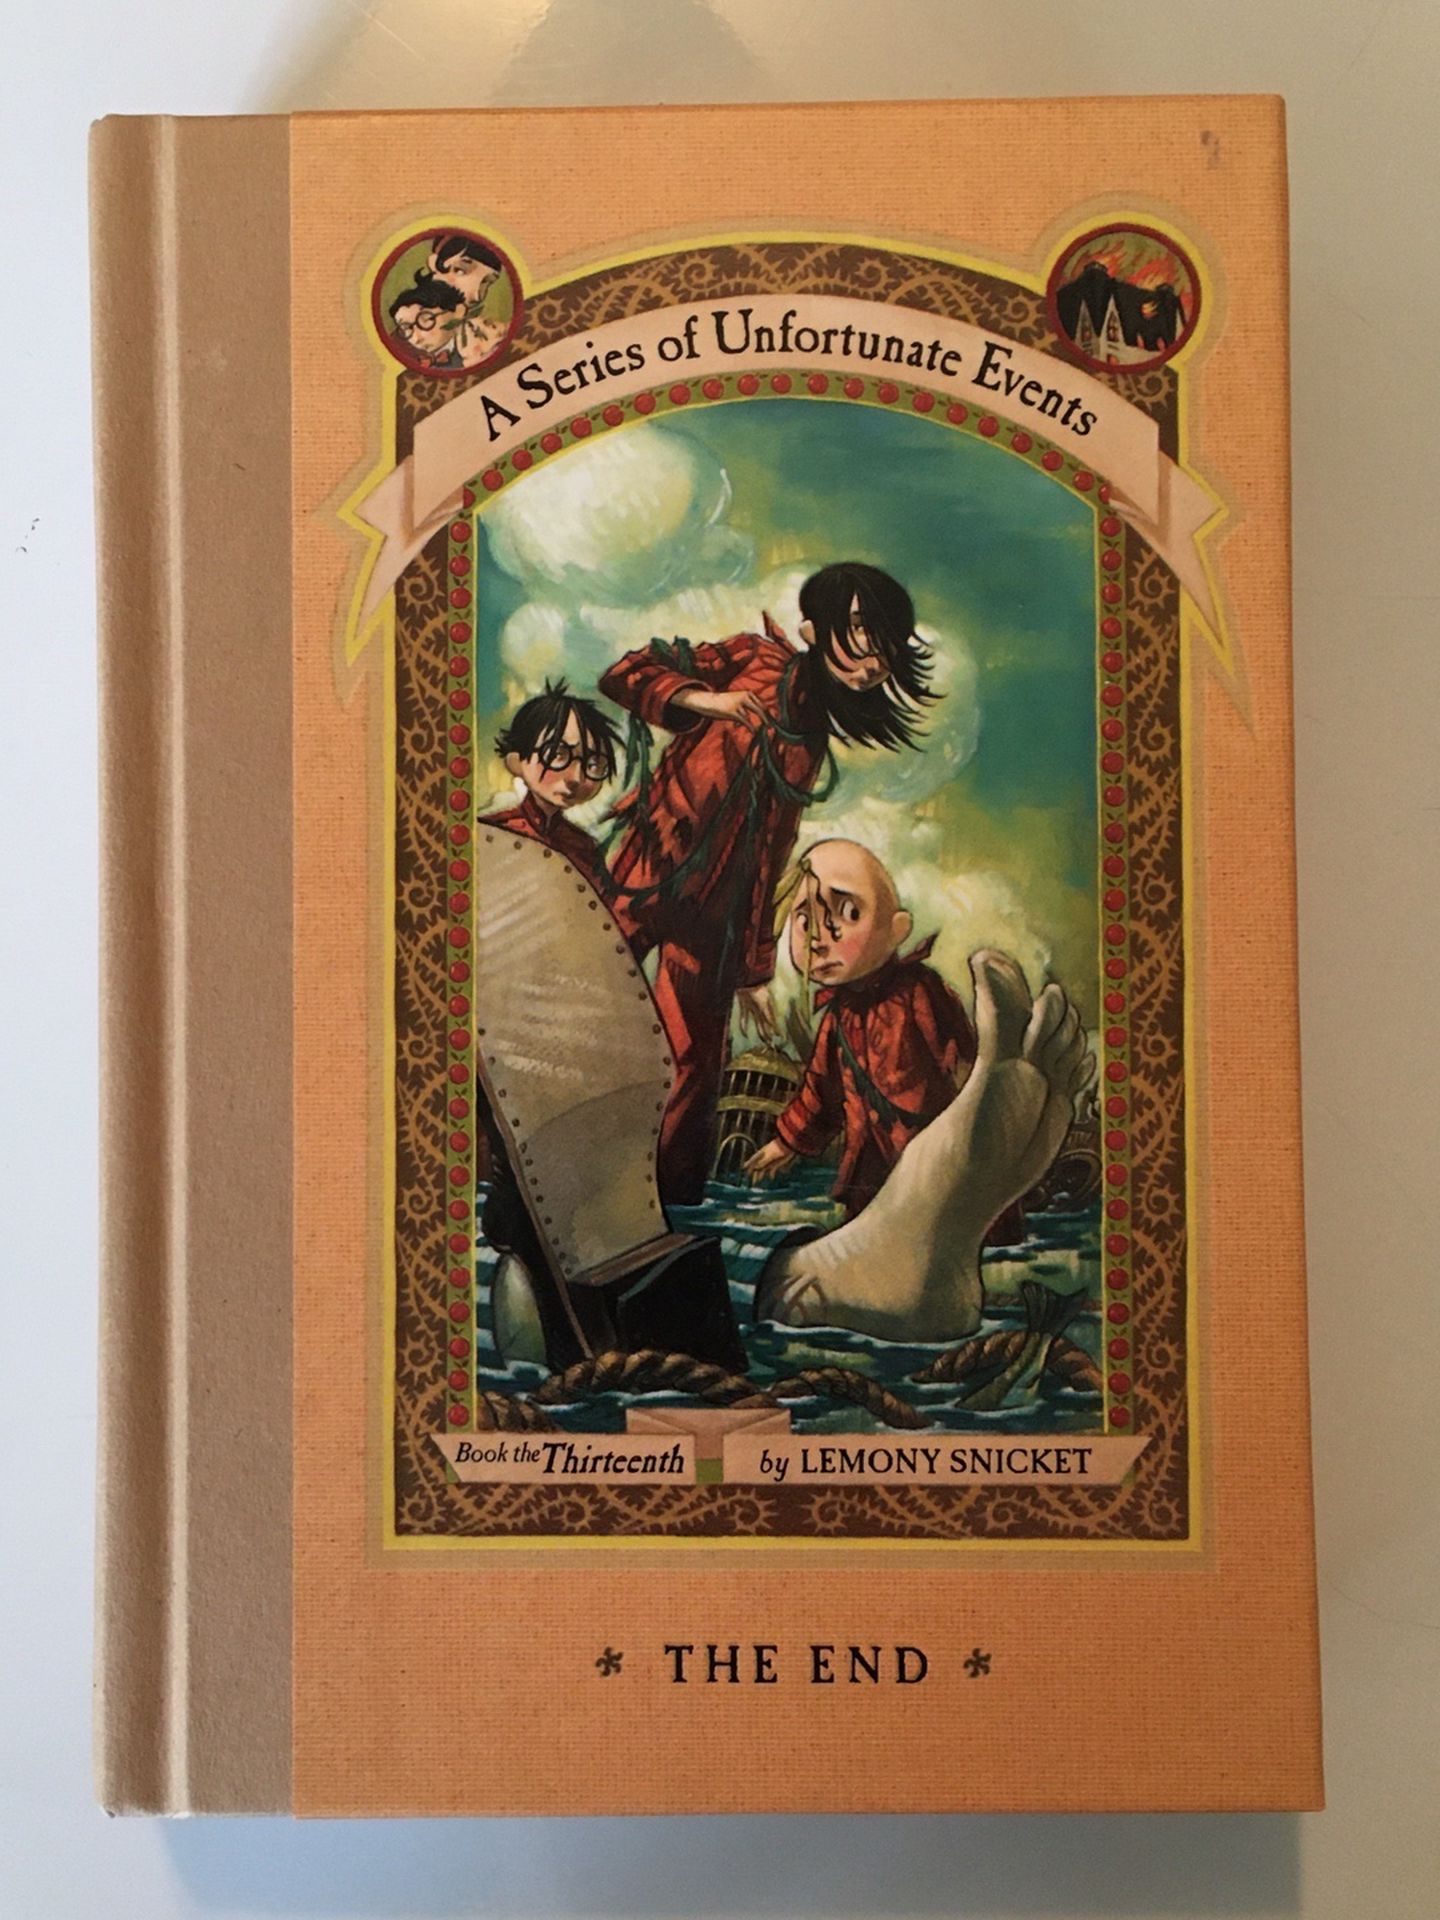 Lemony Snicket’s (A Series Of Unfortunate Events) #13 : The End